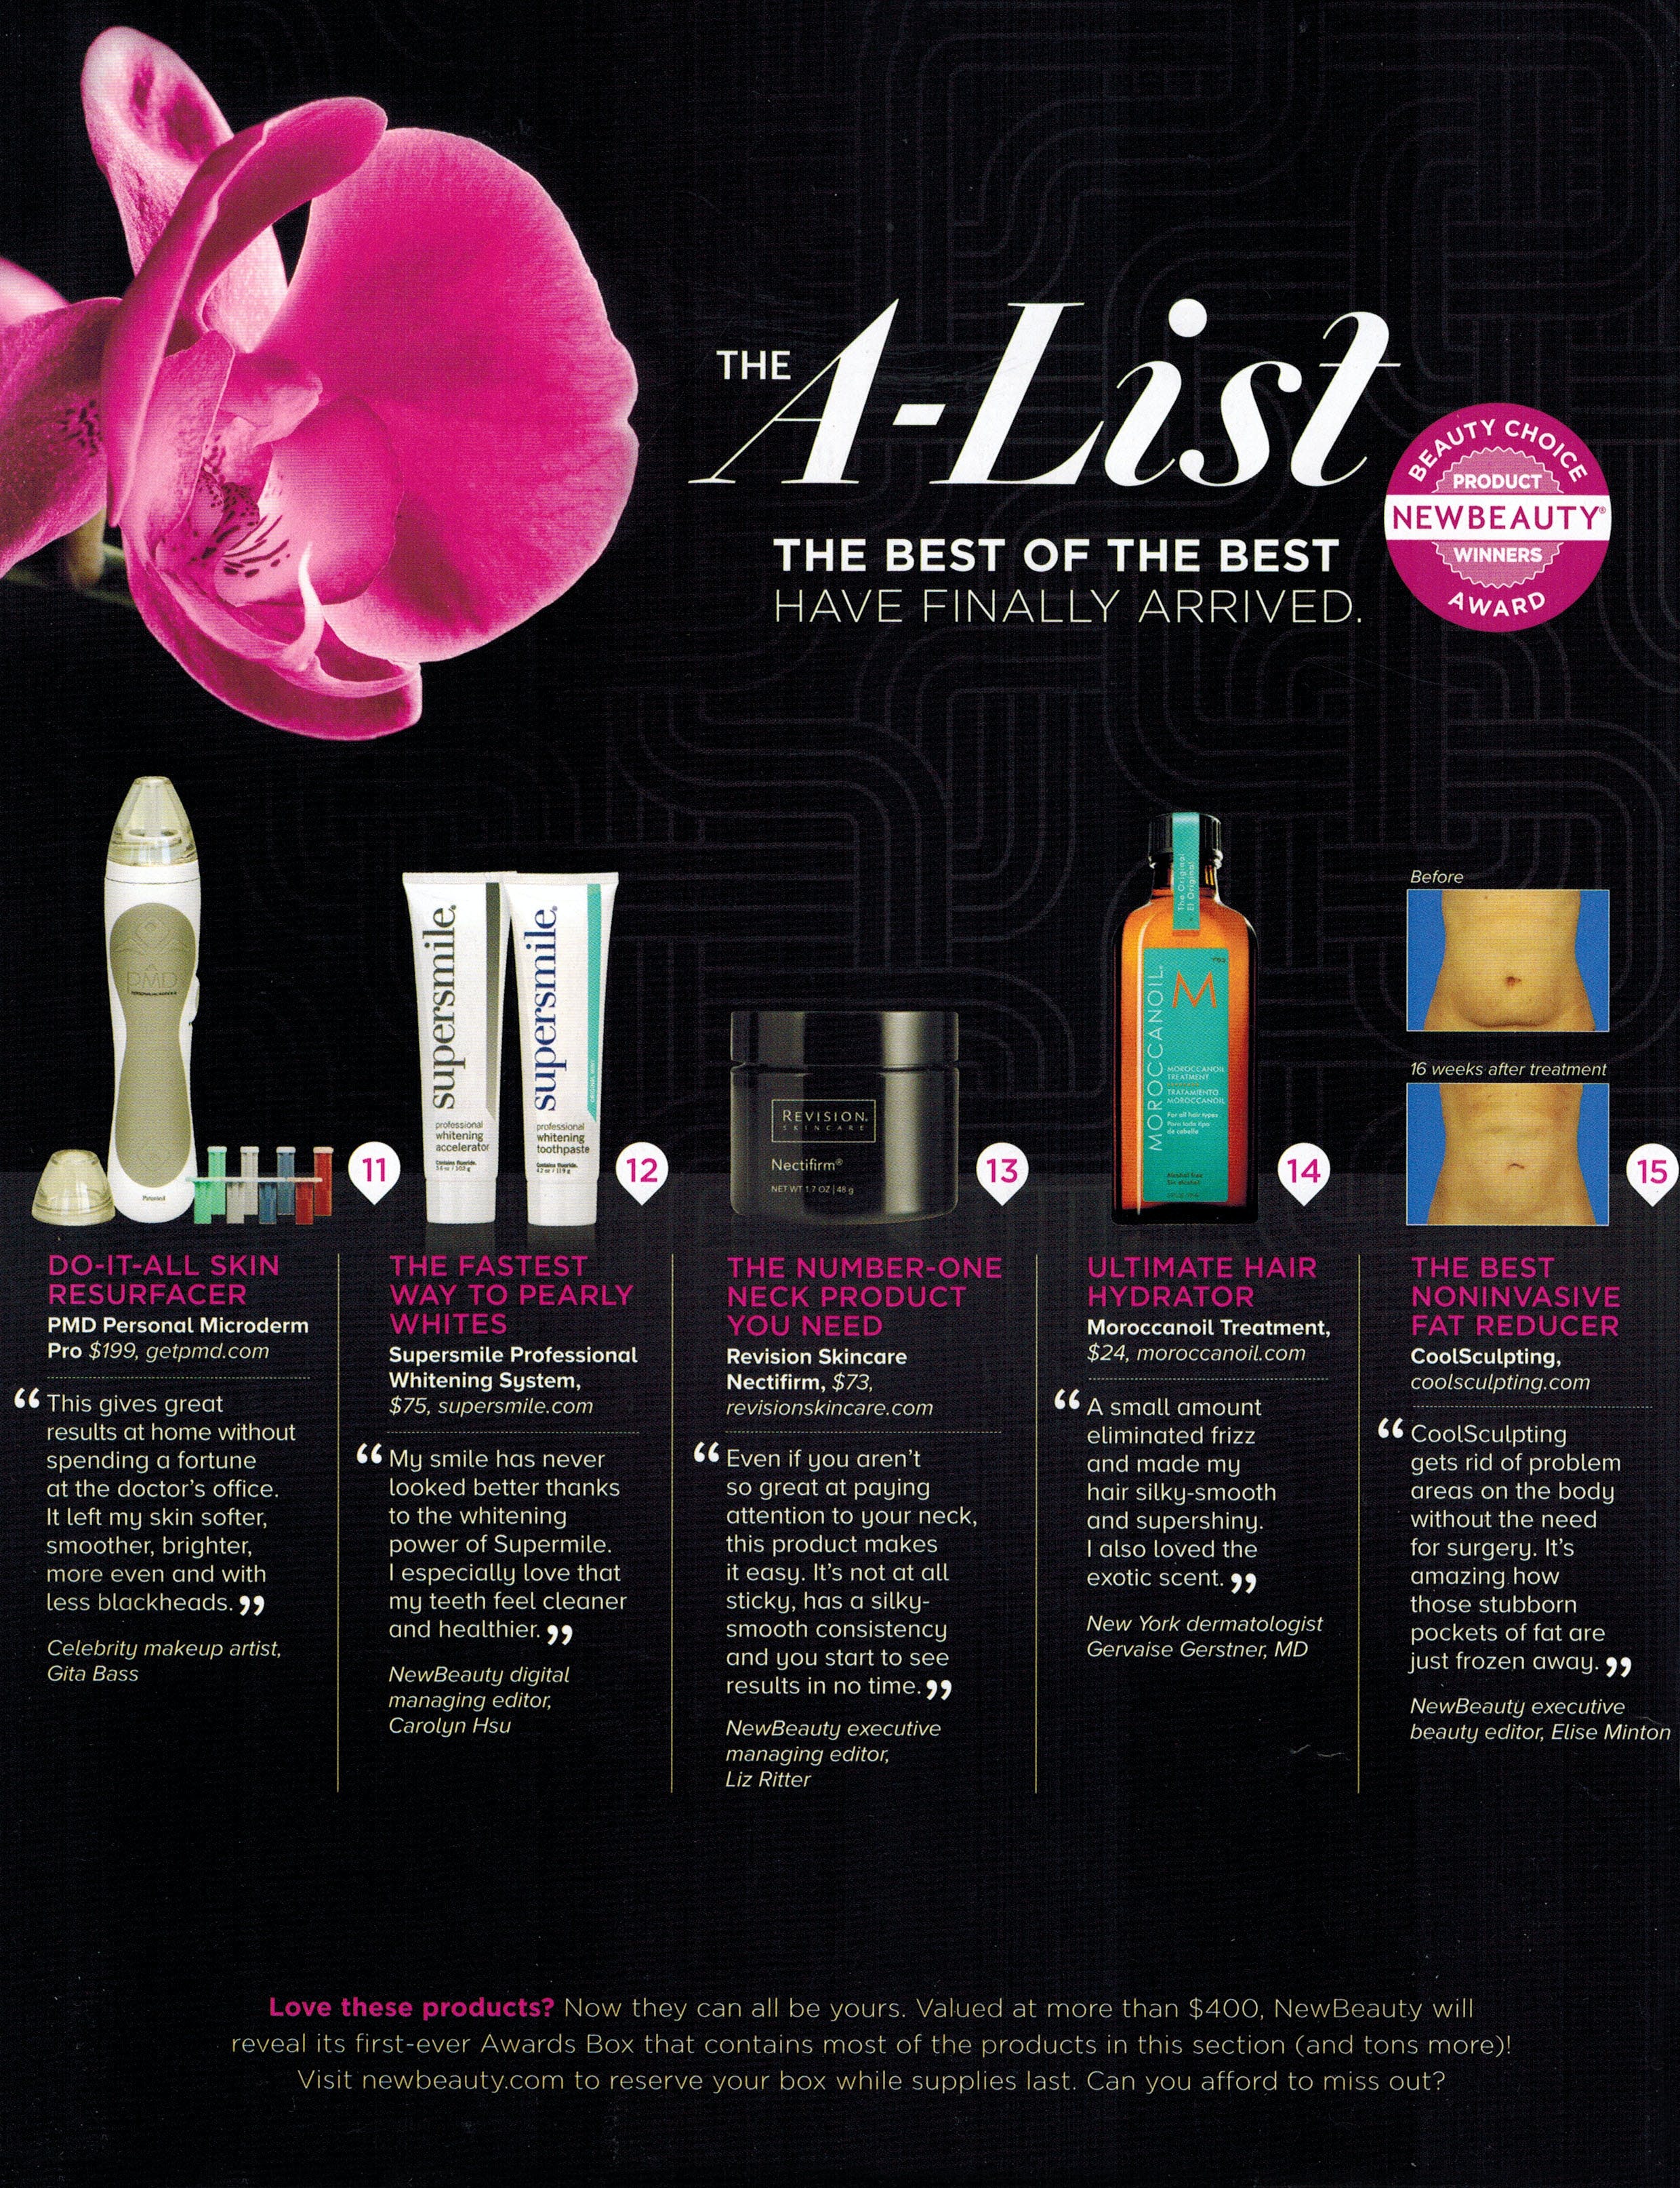 The A-List: Do It All Skin Resurfacer featuring the PMD Personal Microderm